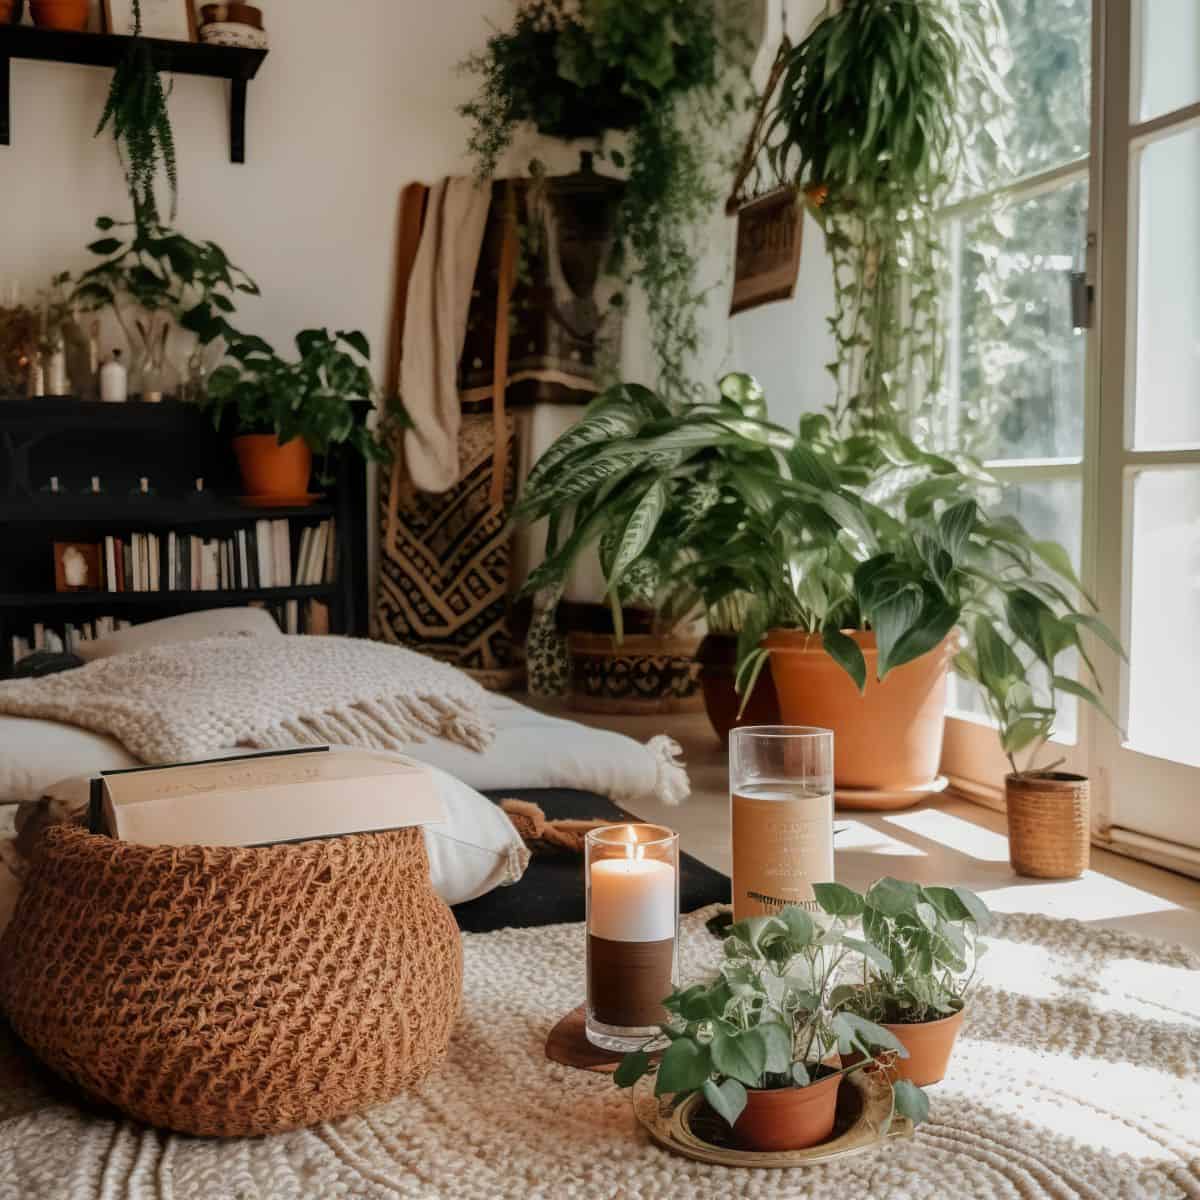 A bohemian style home with crochet rug and wicker table. on the rug are large decorative candles that are lit next to potted house plants on a dish. Surrounding the home are various houseplants of many different shapes and sizes with vines hanging around everywhere. It is a serenely green environment.